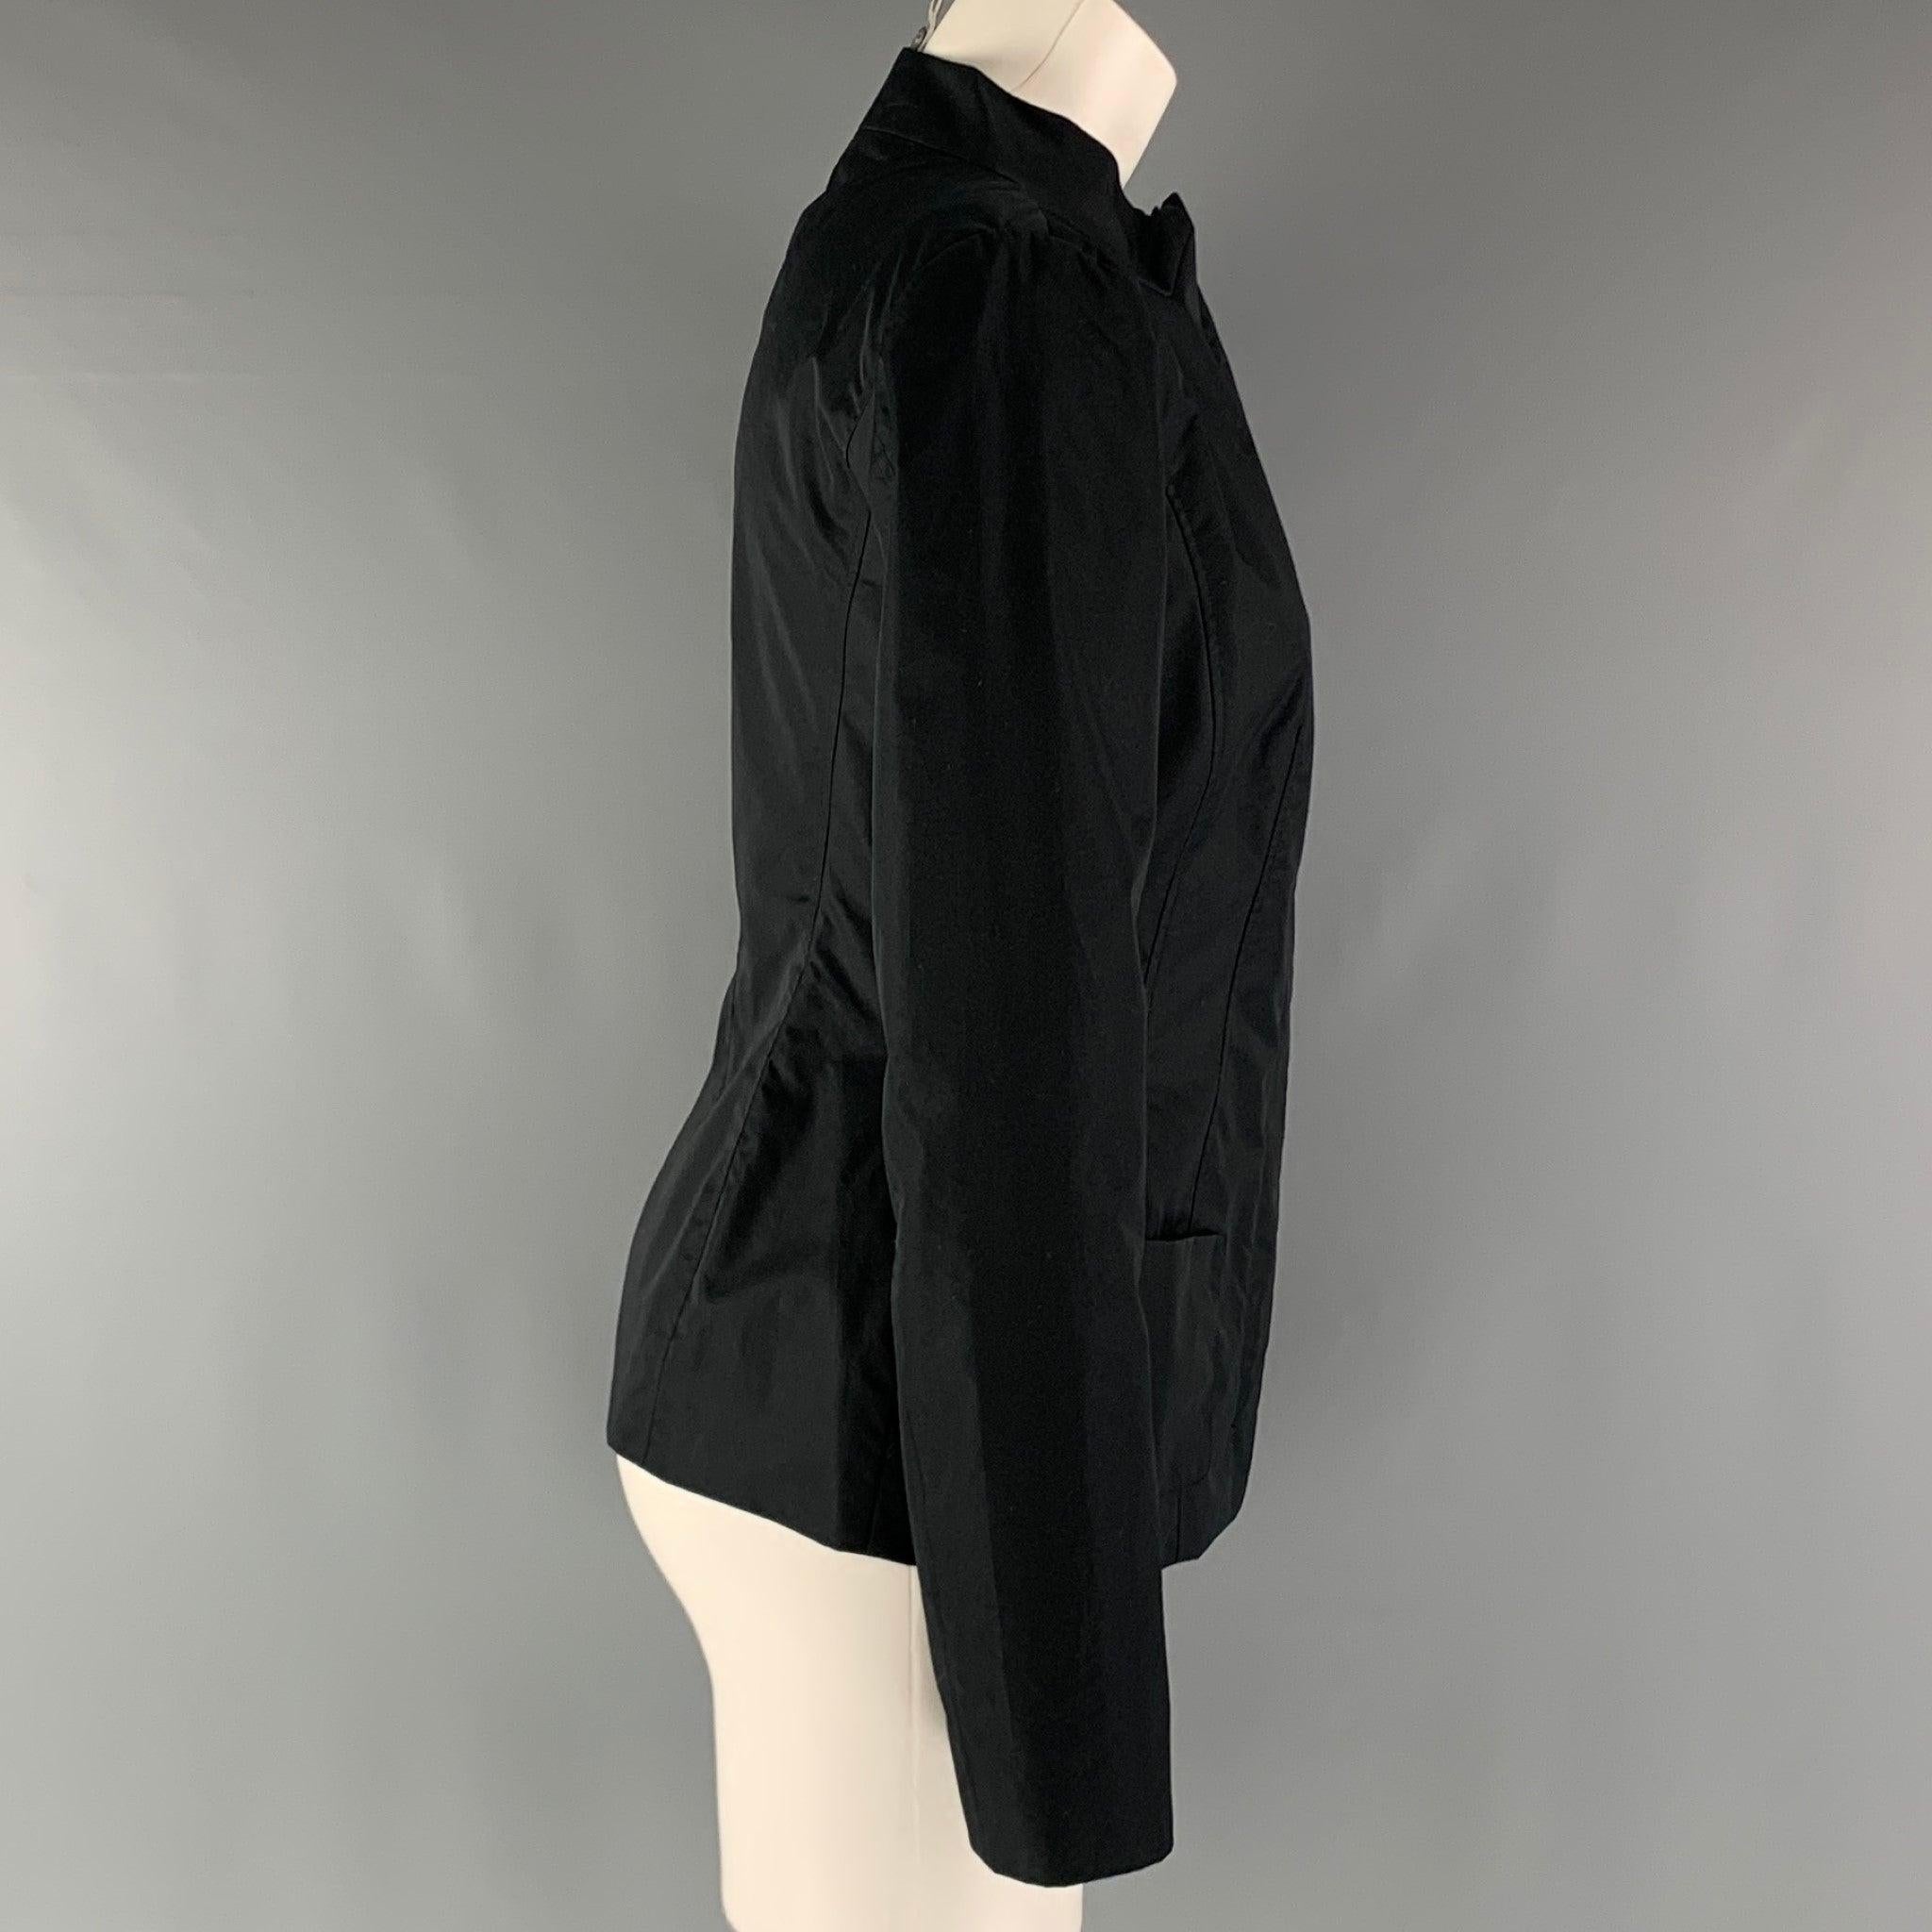 JIL SANDER jacket comes in a black cotton and polyester woven material featuring a front pockets, and a zip up button closure. Made in Italy.New with Tags. 

Marked:   36 

Measurements: 
 
Shoulder: 15.5 inches 
 
 Bust: 40 inches Sleeve: 24.5